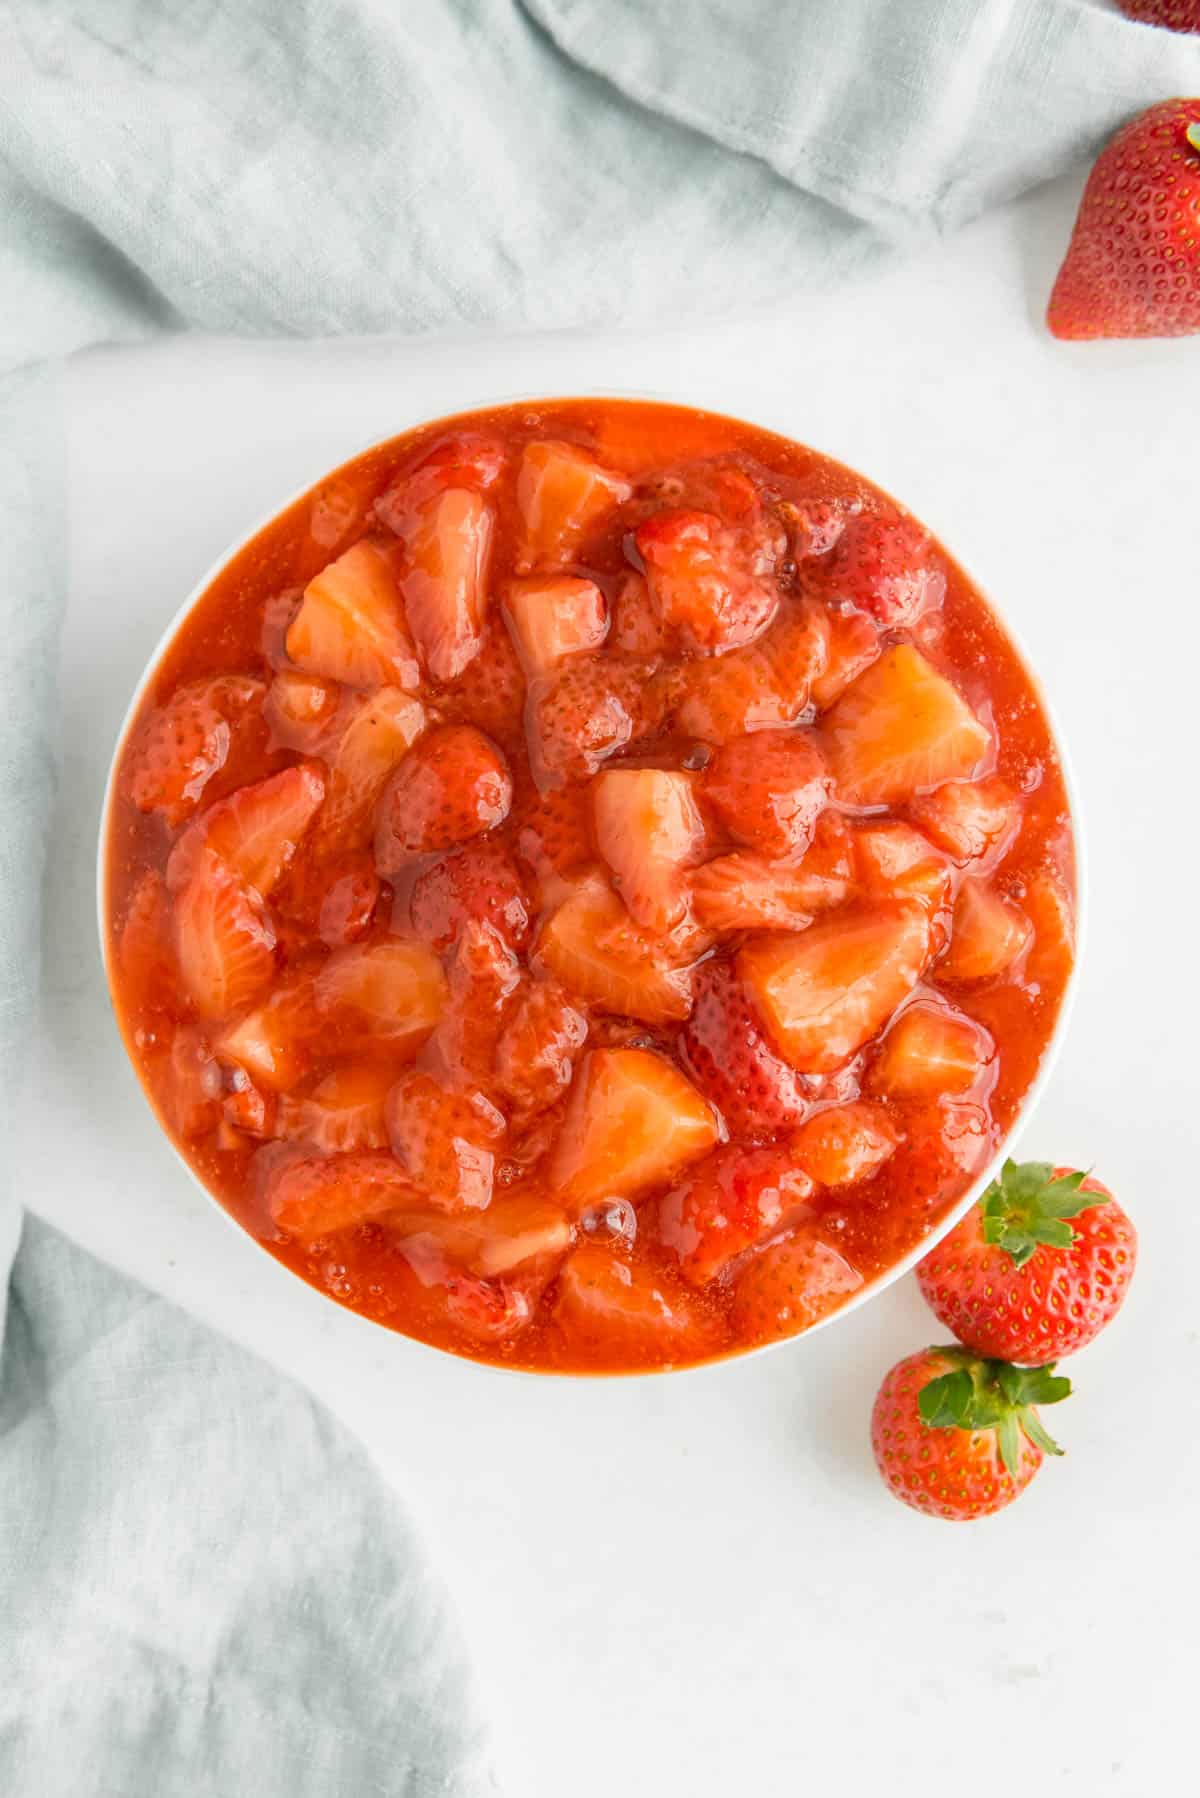 Overhead view of a large white bowl filled with strawberry sauce.